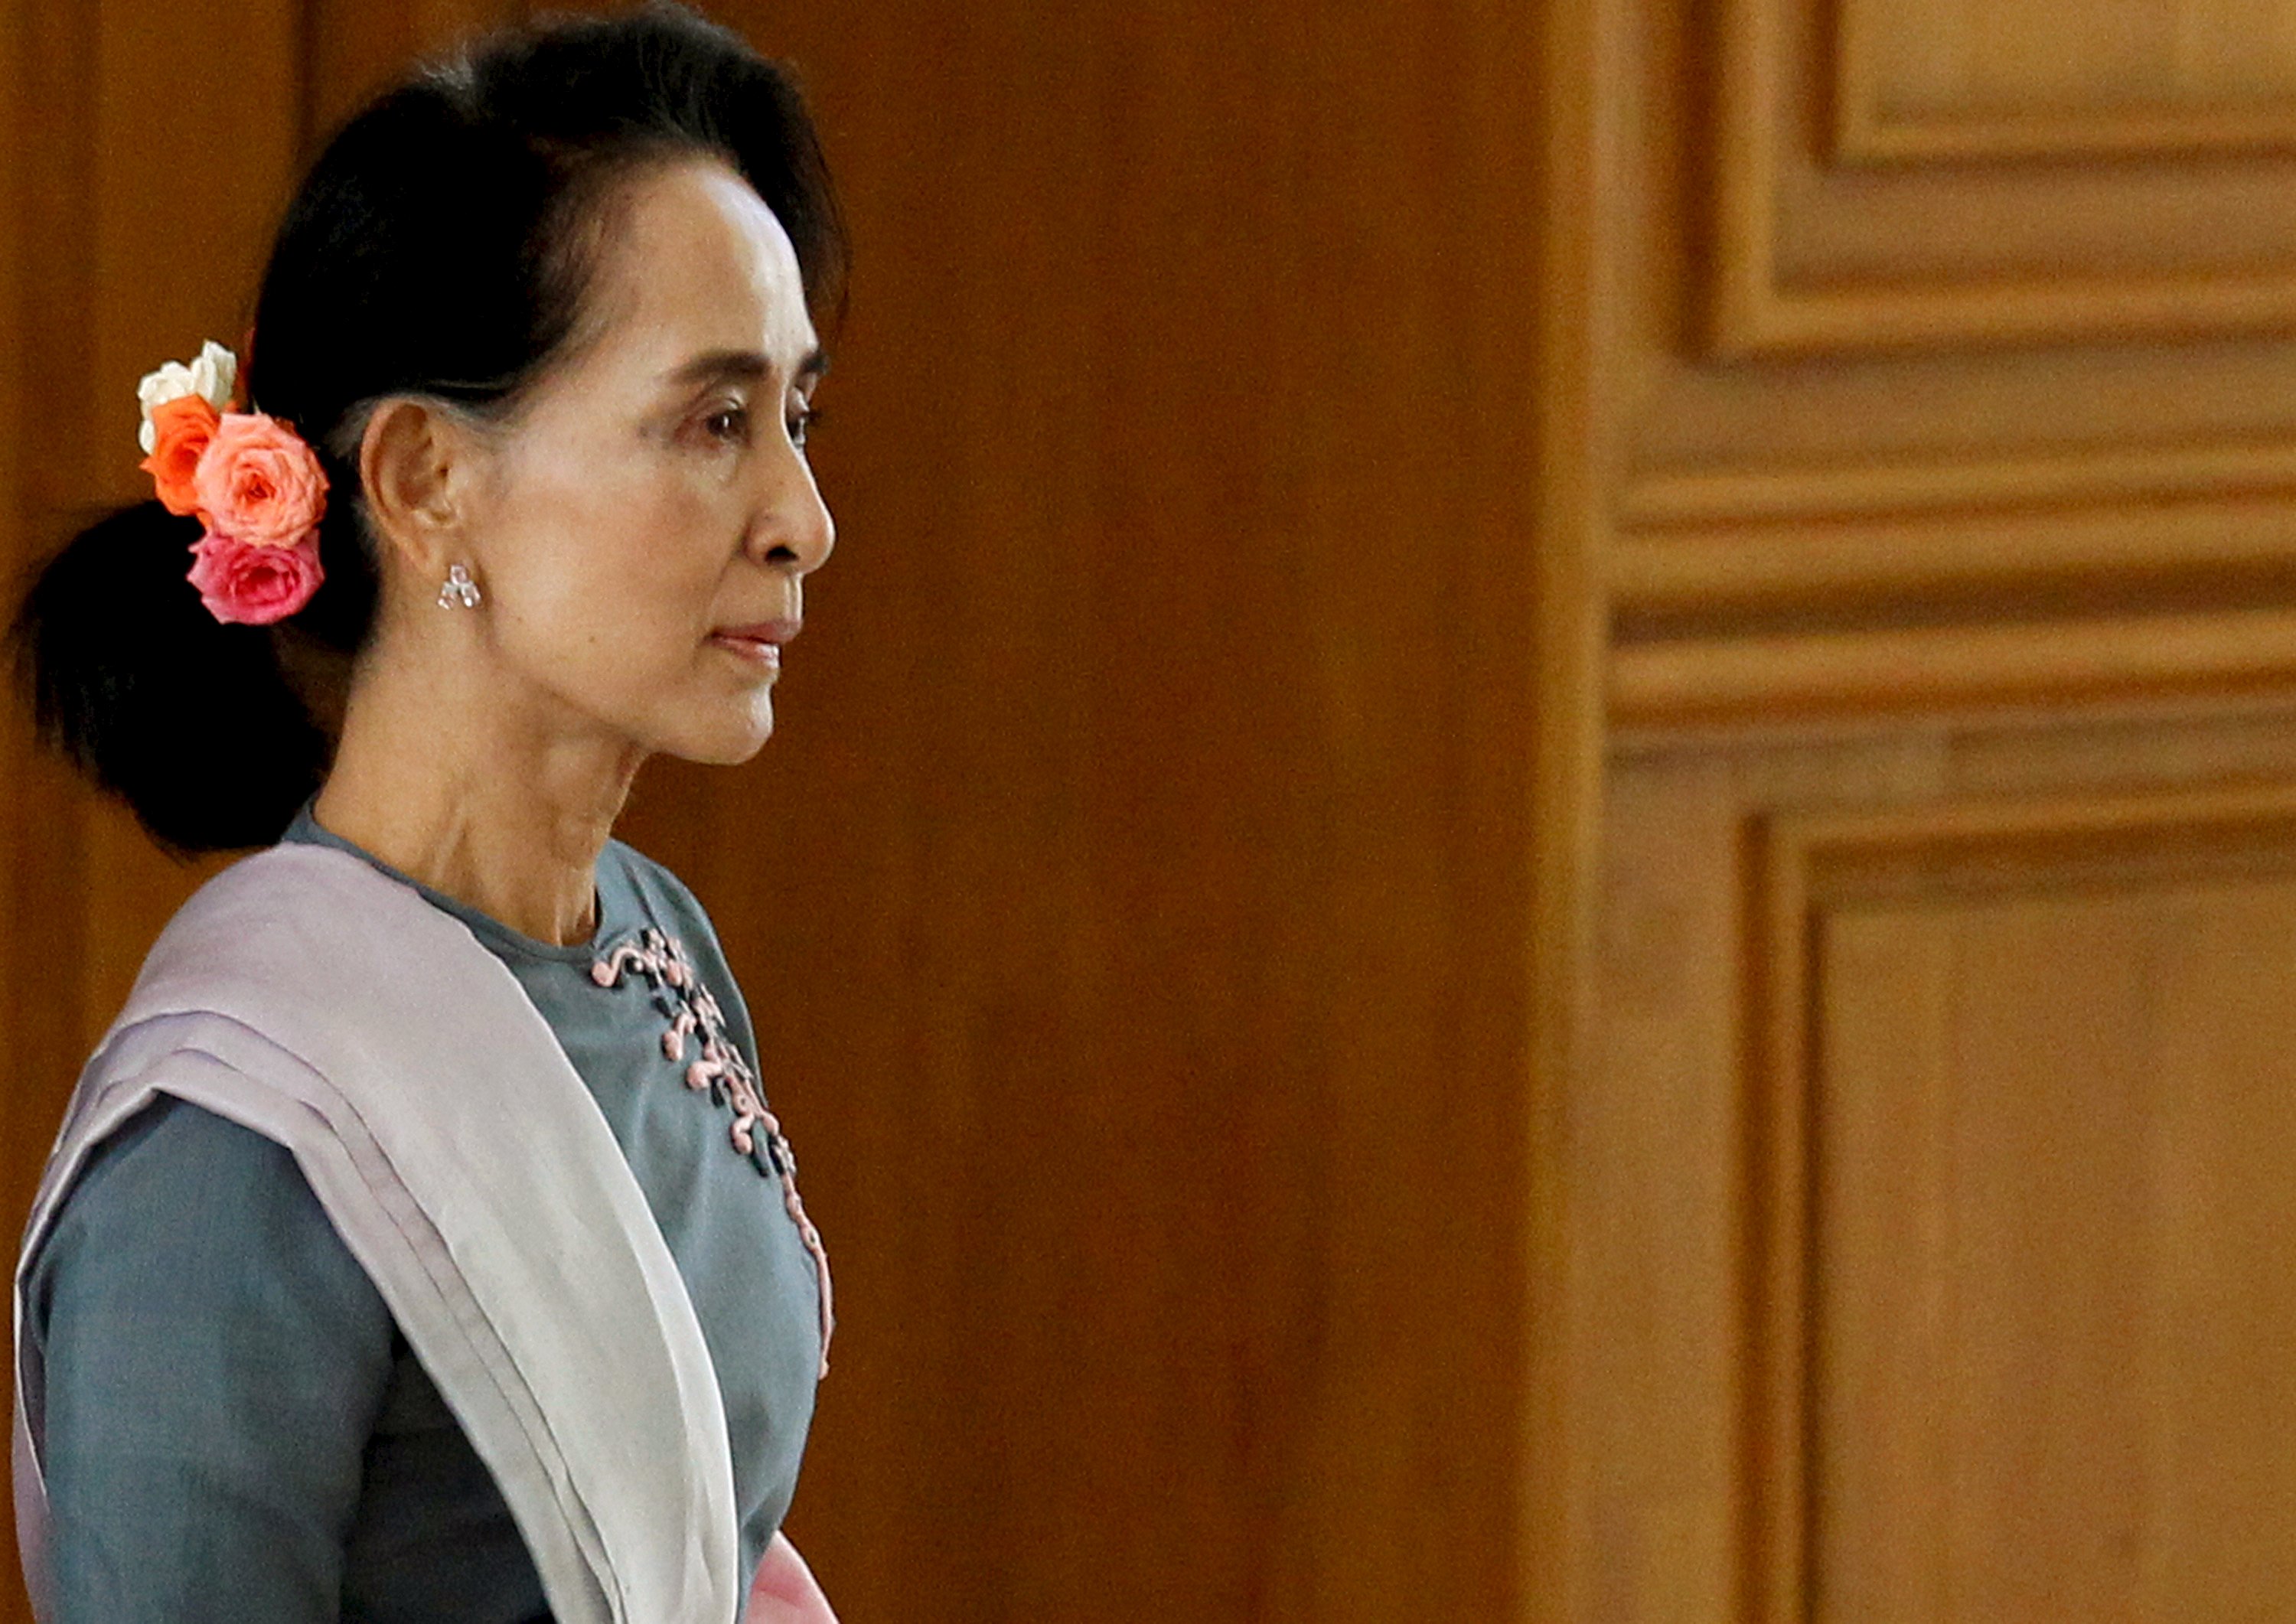 National League for Democracy (NLD) party leader Aung San Suu Kyi arrives for Myanmar's first parliament meeting after the November 8 general elections, at the Lower House of Parliament in Naypyitaw November 16, 2015. Photo: Reuters